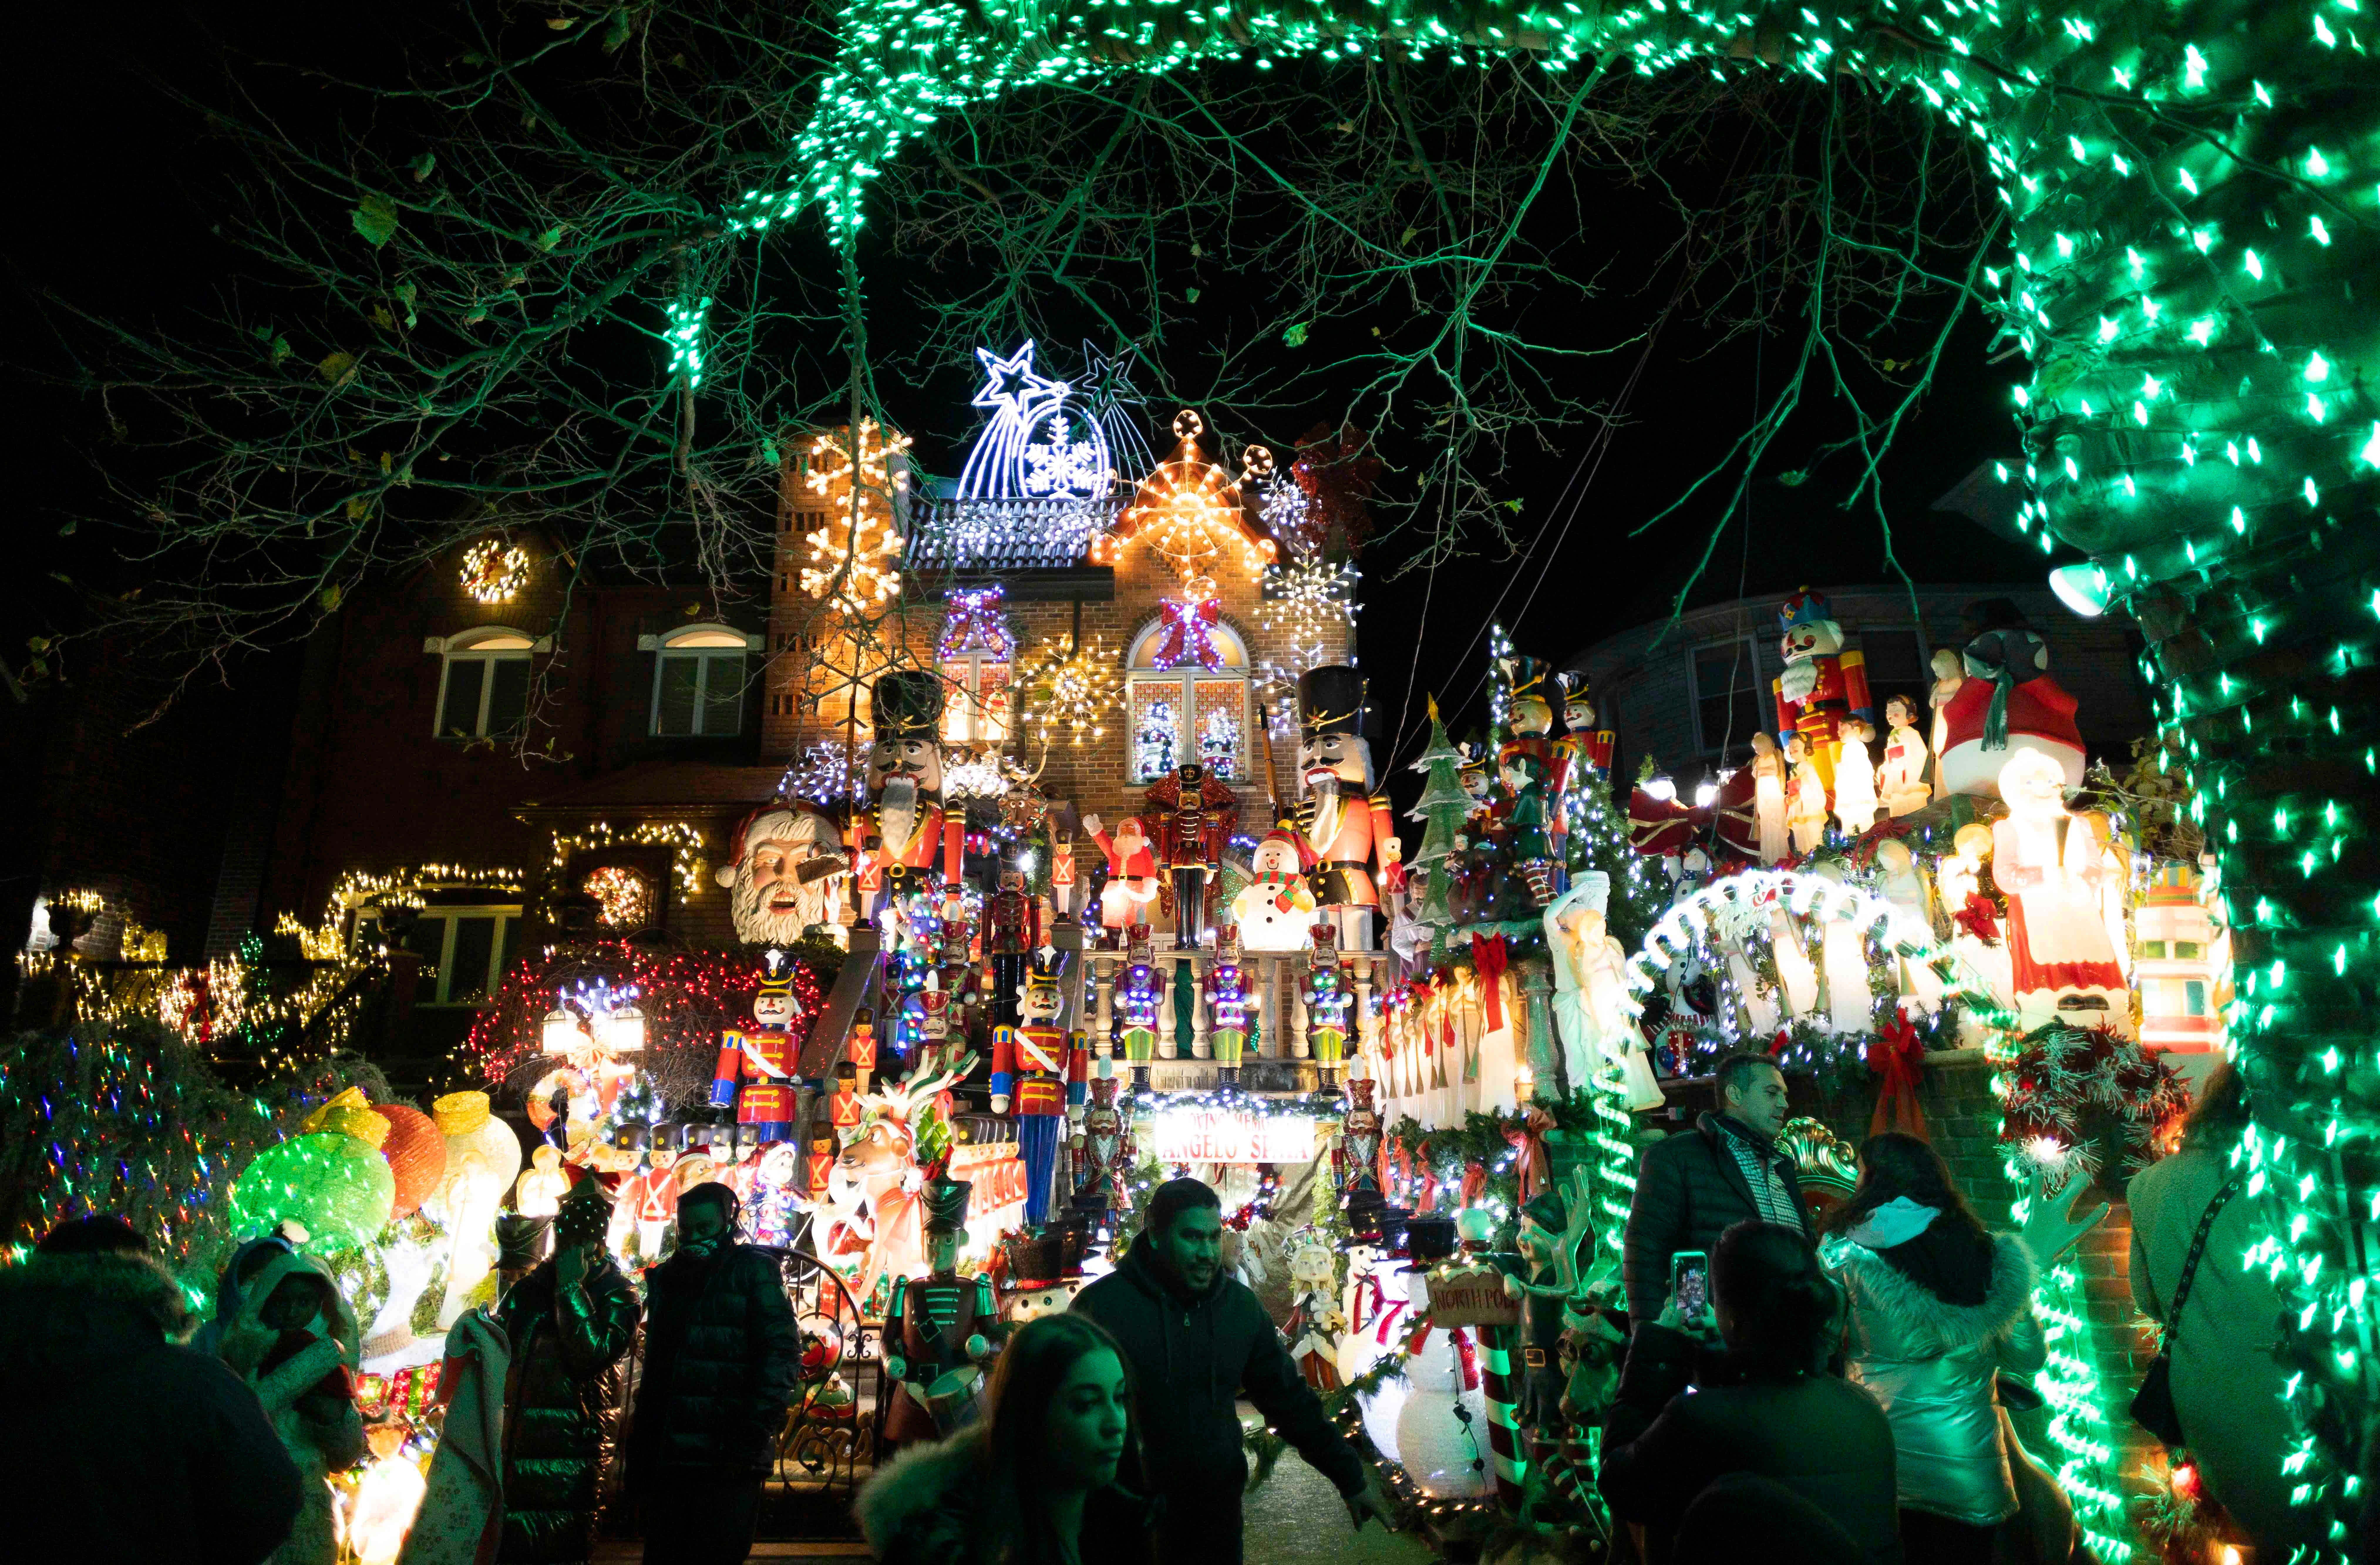 A house decorated in Christmas lights in the Dyker Heights neighbourhood of Brooklyn